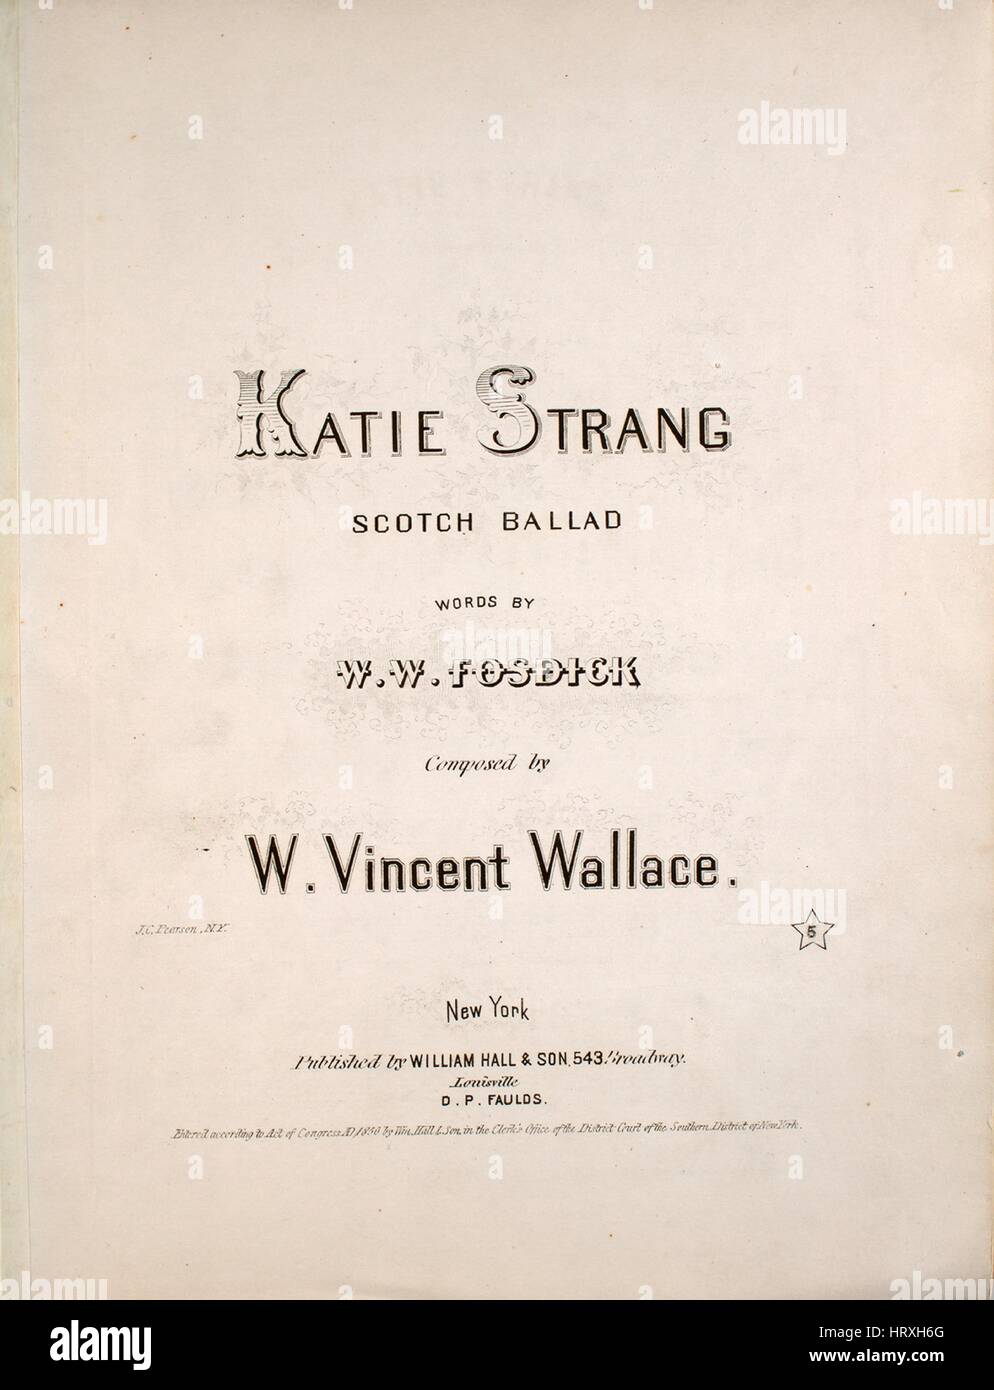 Sheet music cover image of the song 'Katie Strang Scotch Ballad', with original authorship notes reading 'Words by WW Fosdick Composed by W Vincent Wallace', United States, 1856. The publisher is listed as 'William Hall and Son, 543 Broadway', the form of composition is 'strophic', the instrumentation is 'piano and voice', the first line reads 'Oh, bonnie Katie Strang, could I turn my heart to words', and the illustration artist is listed as 'J.c. Pearson, N.Y.; Clayton'. Stock Photo